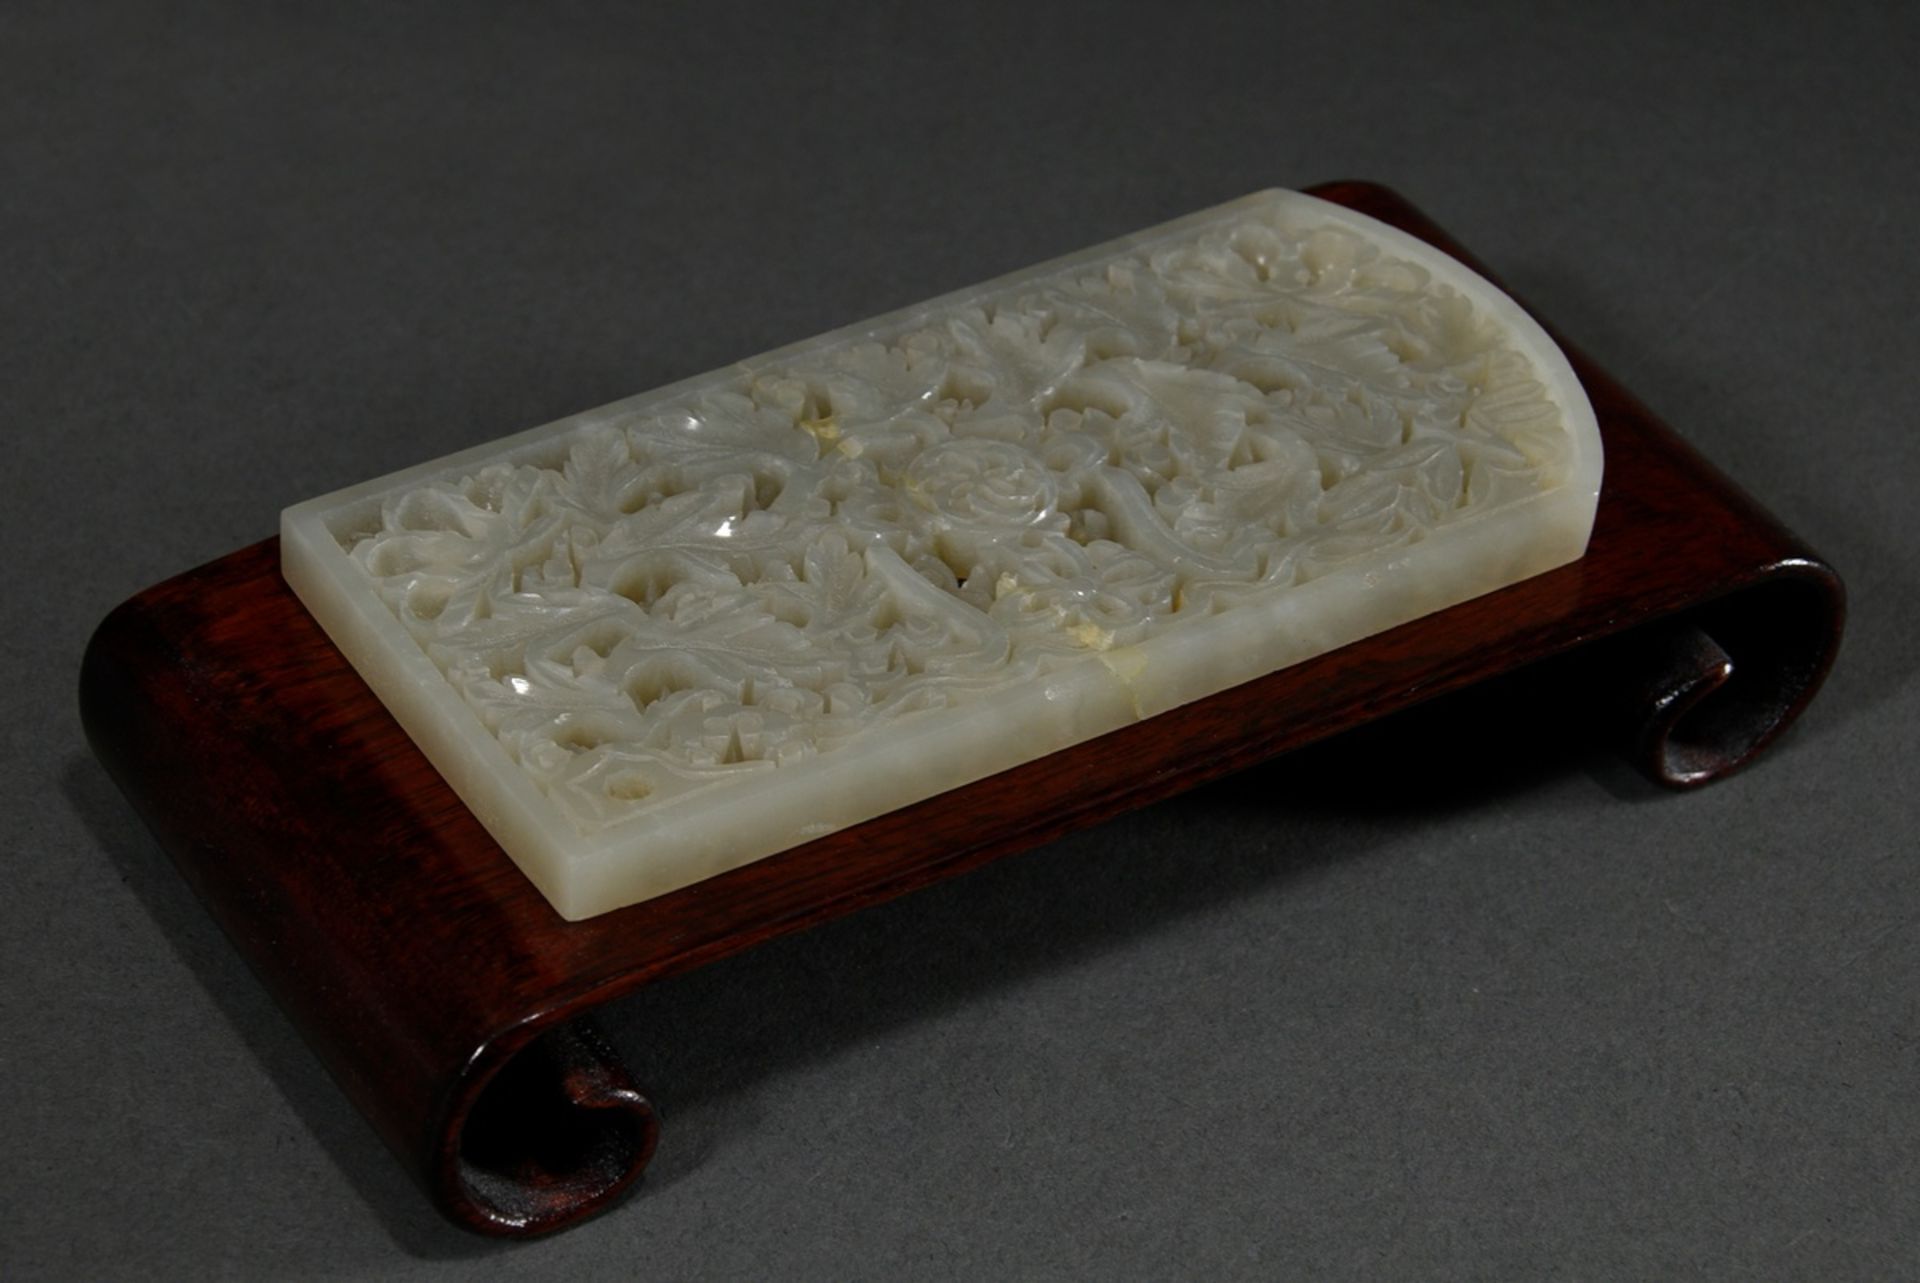 Light filigree openwork jade plaque "Floral Tendrils" in Ming style, wooden base, 11,7x5,4cm, 2 sma - Image 2 of 3